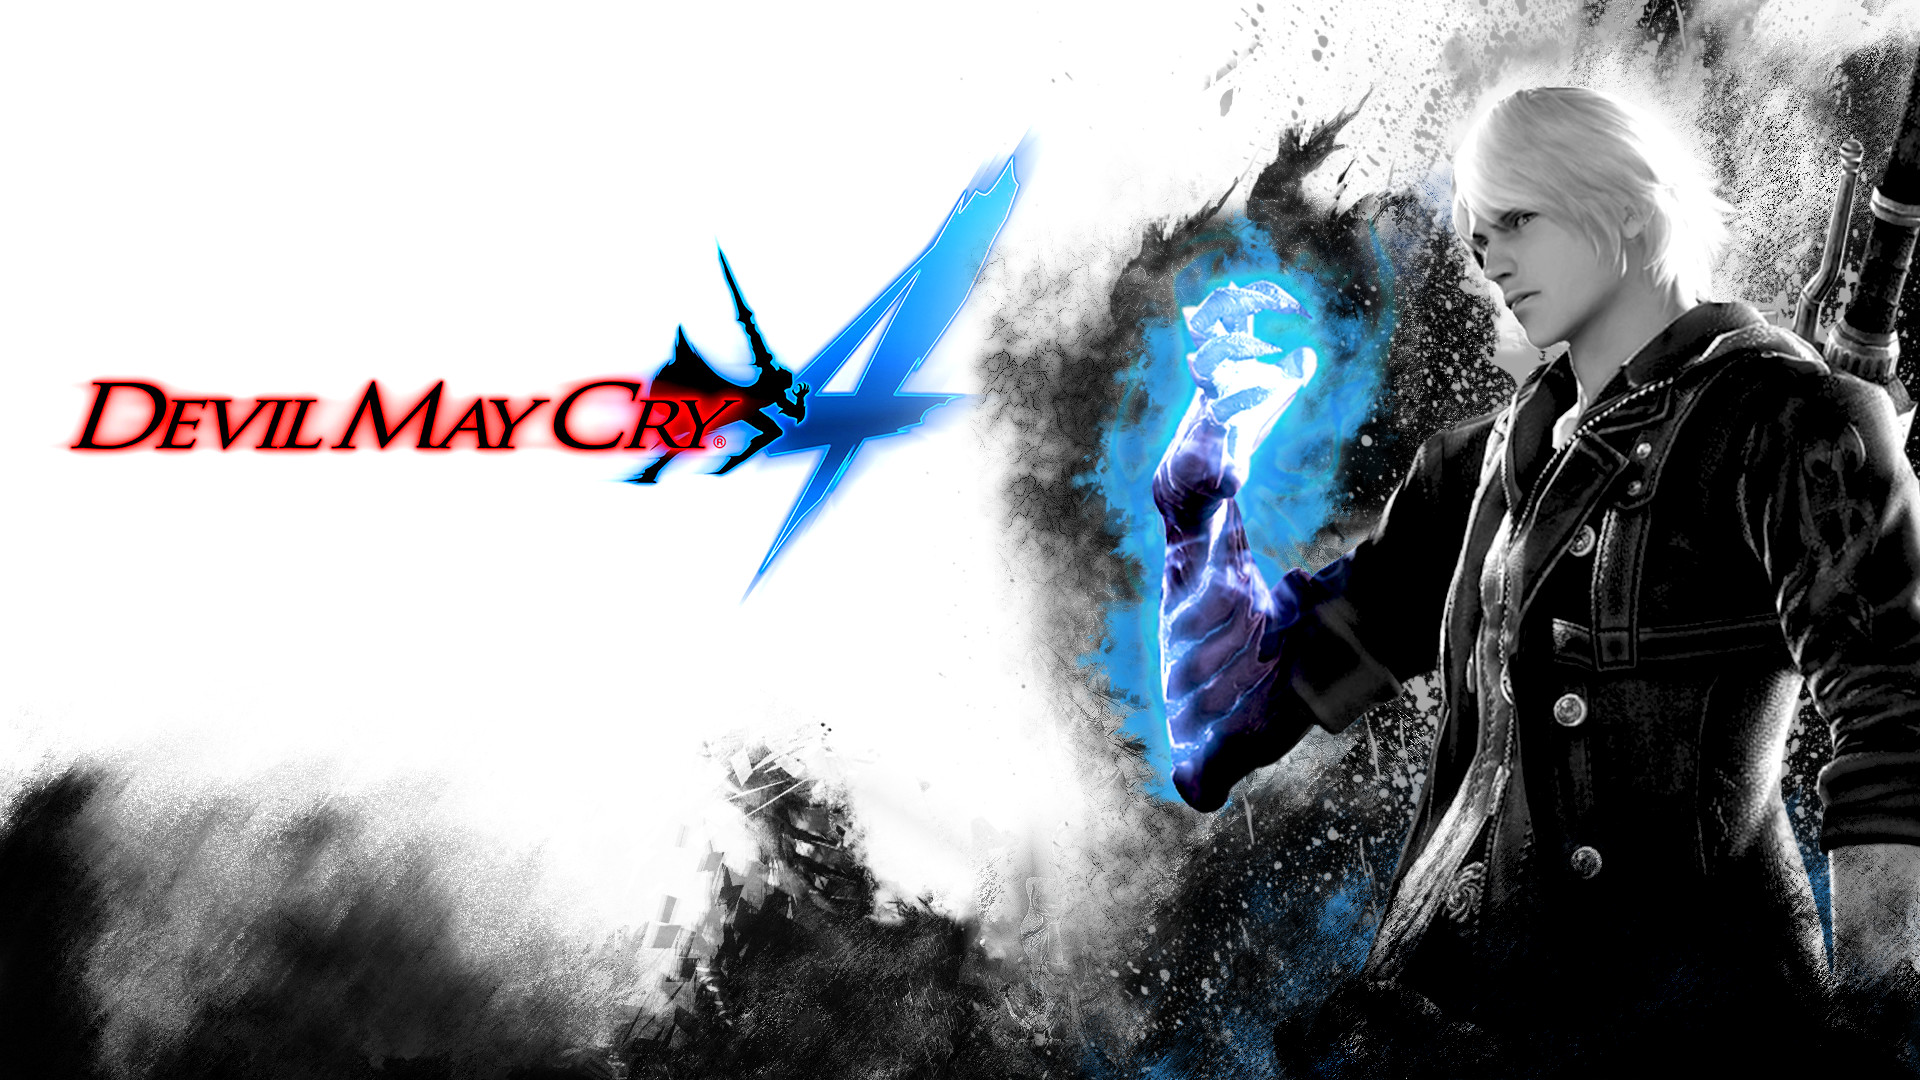 Devil May Cry 3 Wallpaper (62+ images) Vergil Devil May Cry 3 Wallpaper